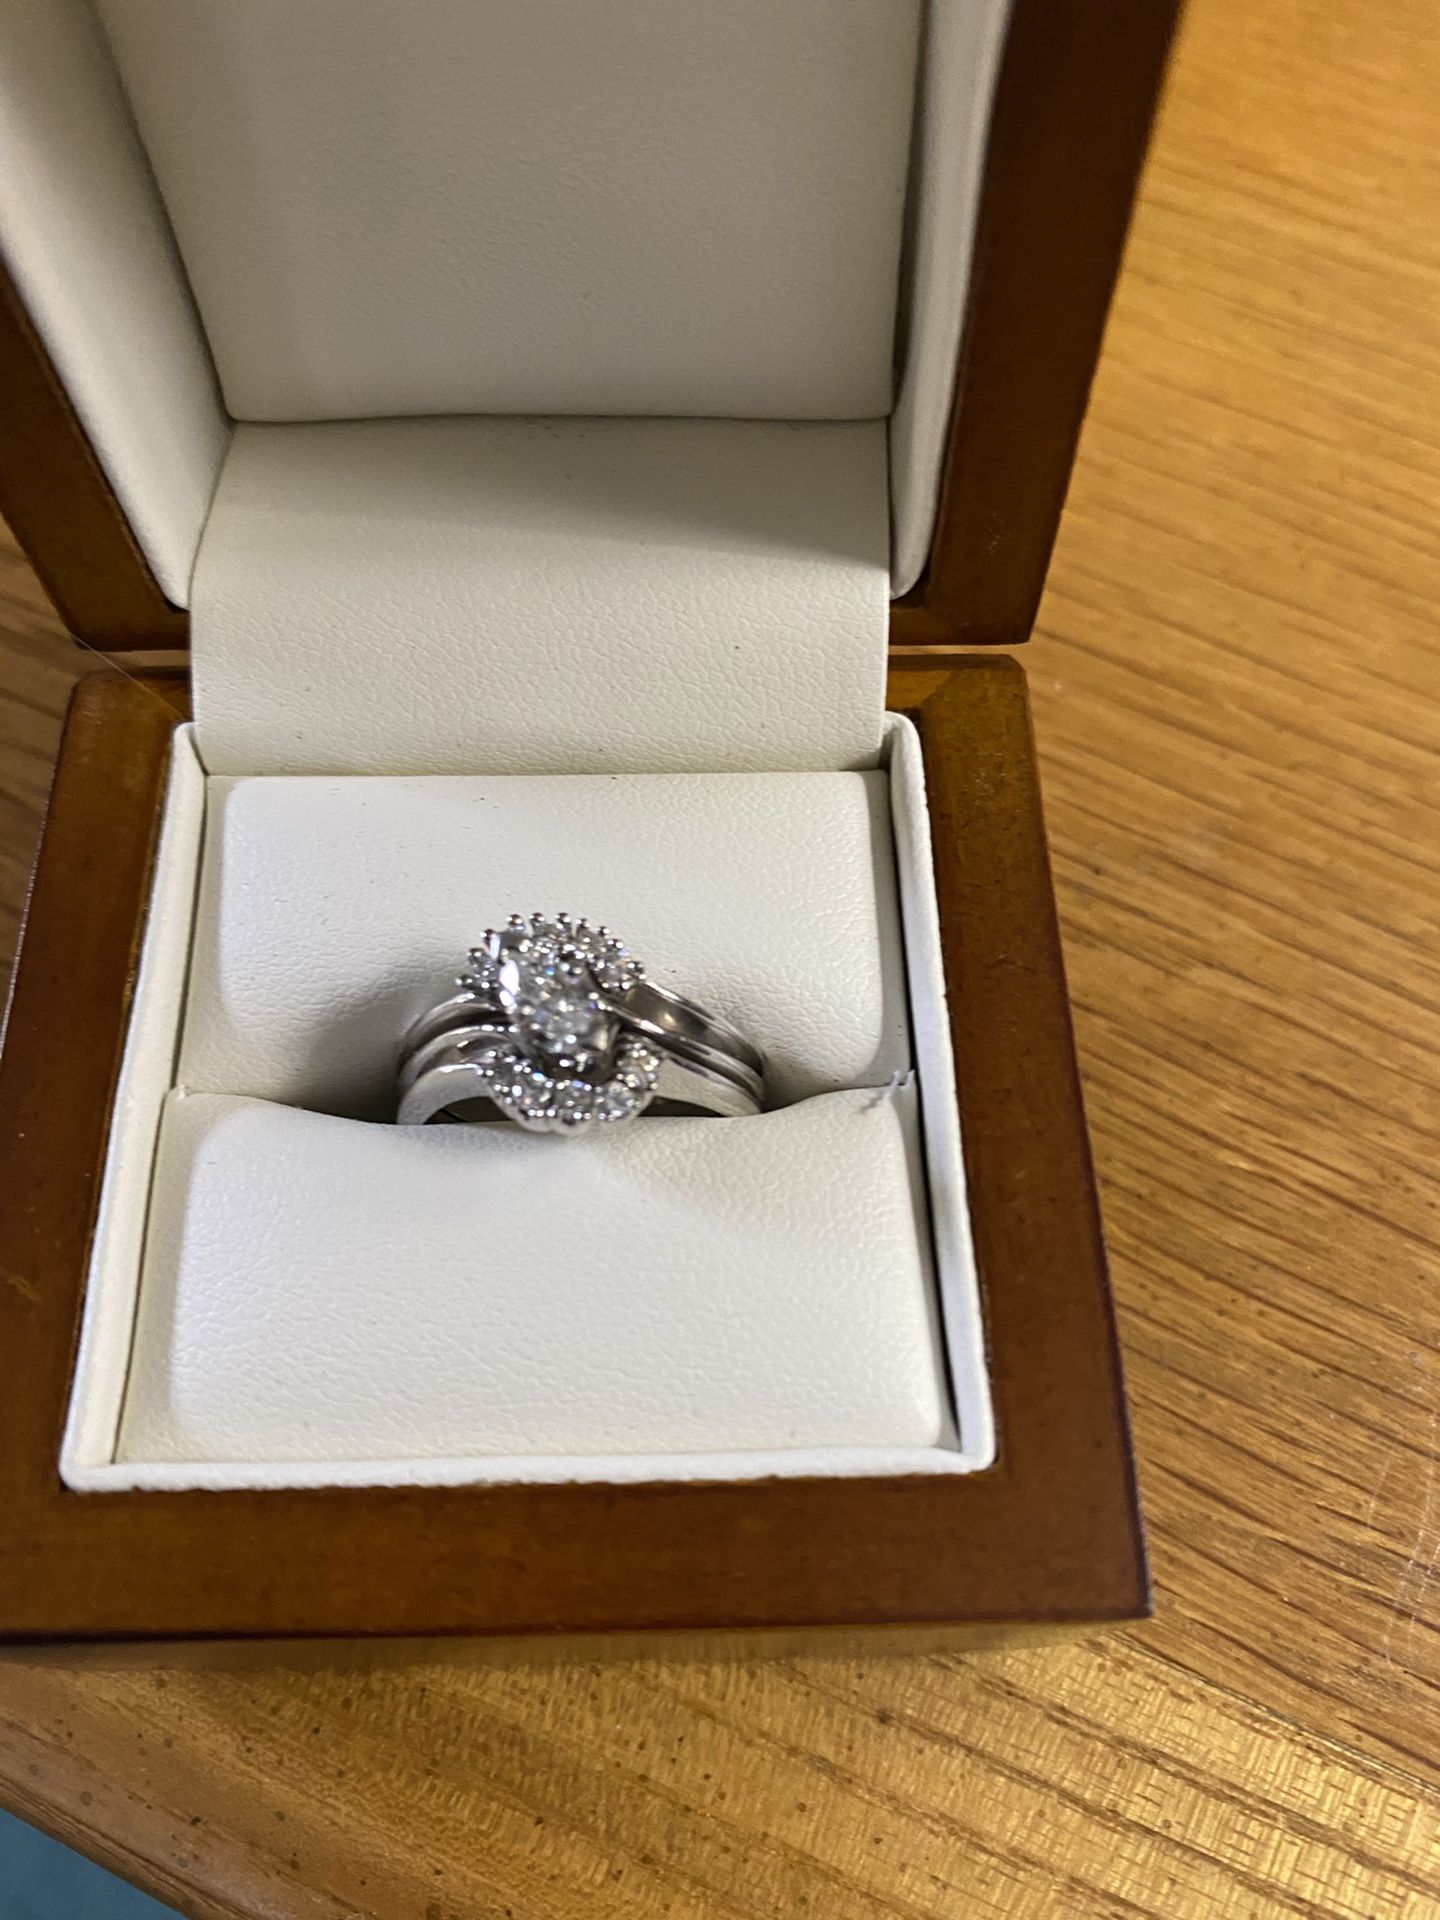 14 K white gold diamond marquises wedding ring with 10 smaller diamonds size 7. Appraised in 2018 for $2225.00. Will supply appraisal paperwork.